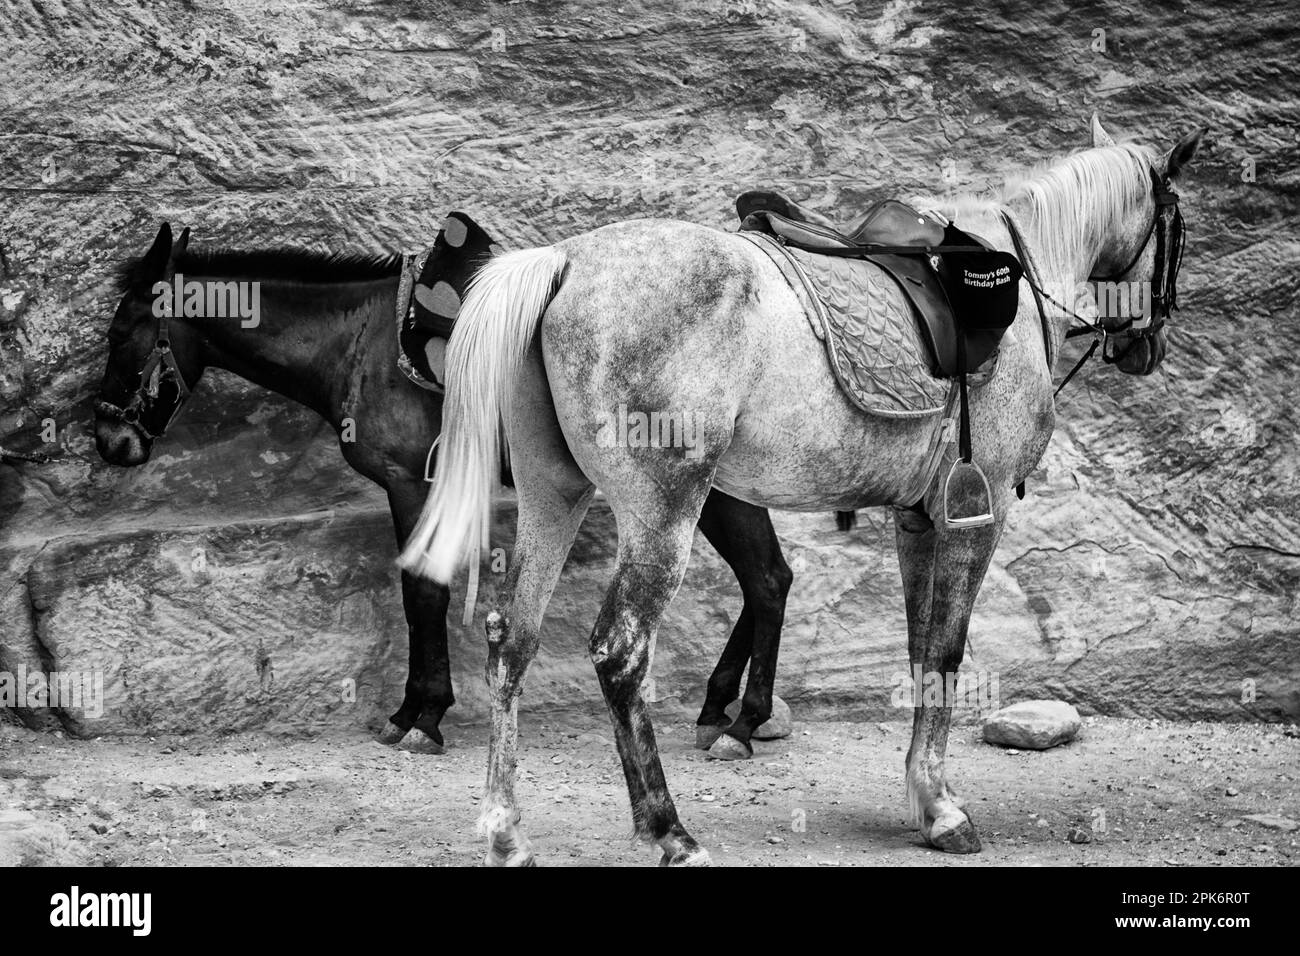 Horses used to ferry tourists that are unable to climb the mountainous terrain. Jordan. Stock Photo